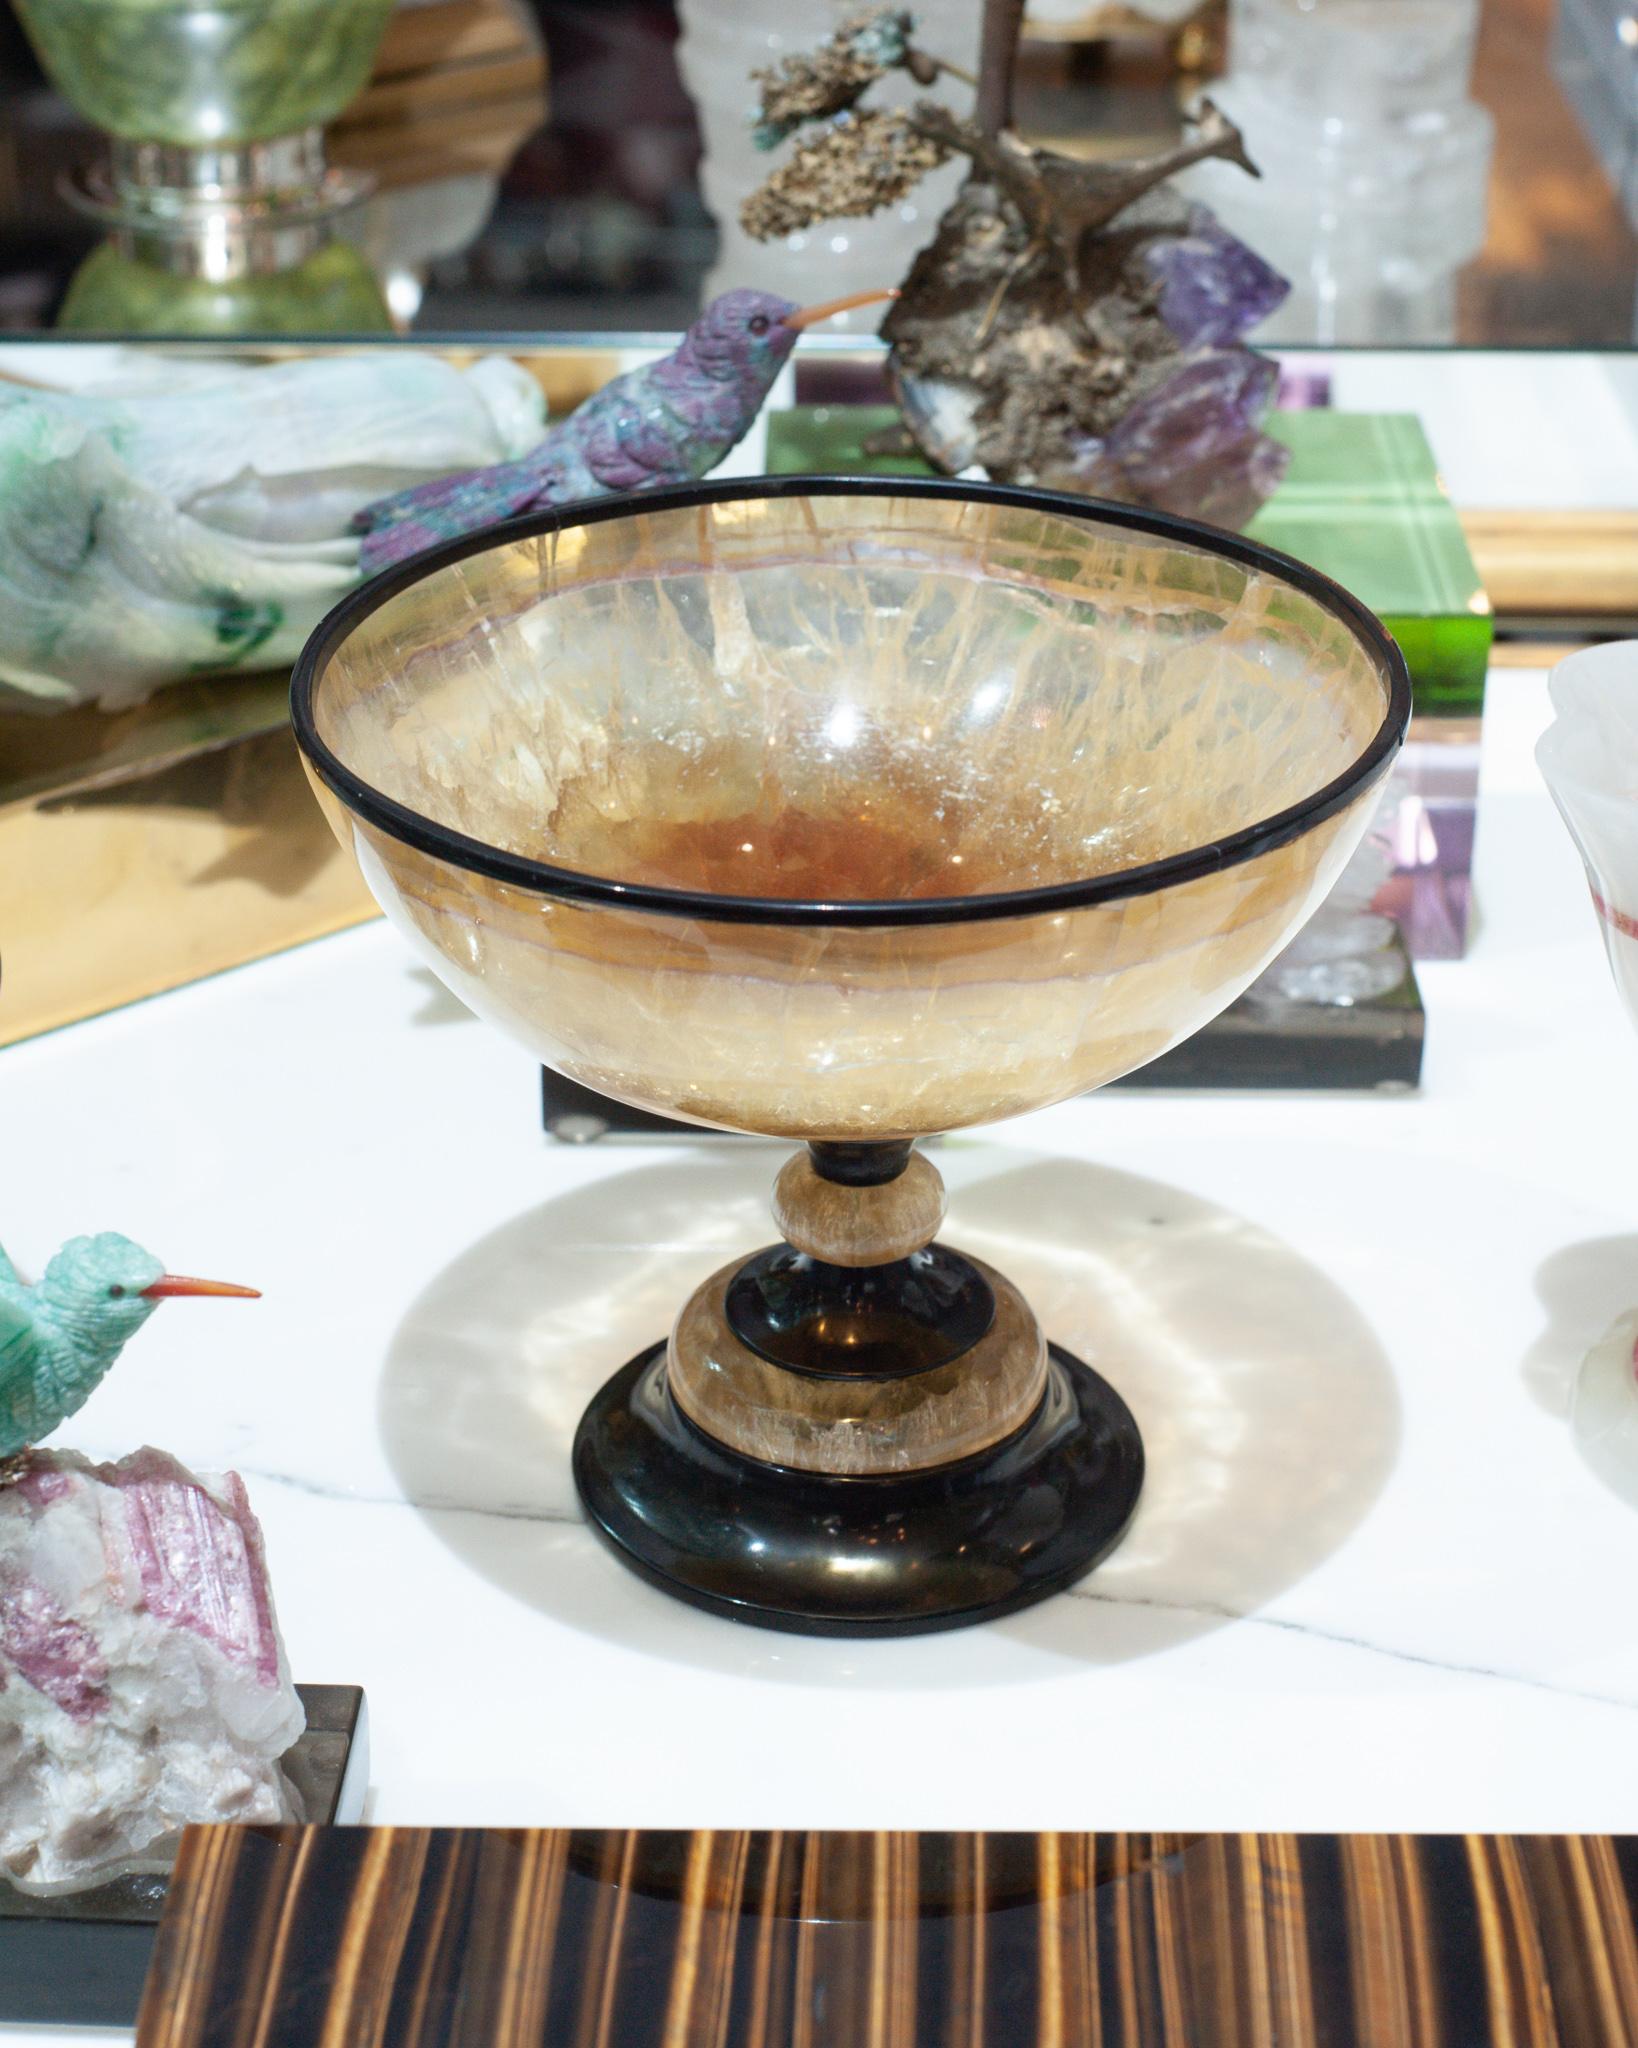 A stunning mid-century bowl, carved from gold tone fluorite, and enhanced with a rim and base of natural black onyx. An exceptional and rare quality of fluorite -this marriage of craftsmanship and natural mineral specimens create a luxurious and